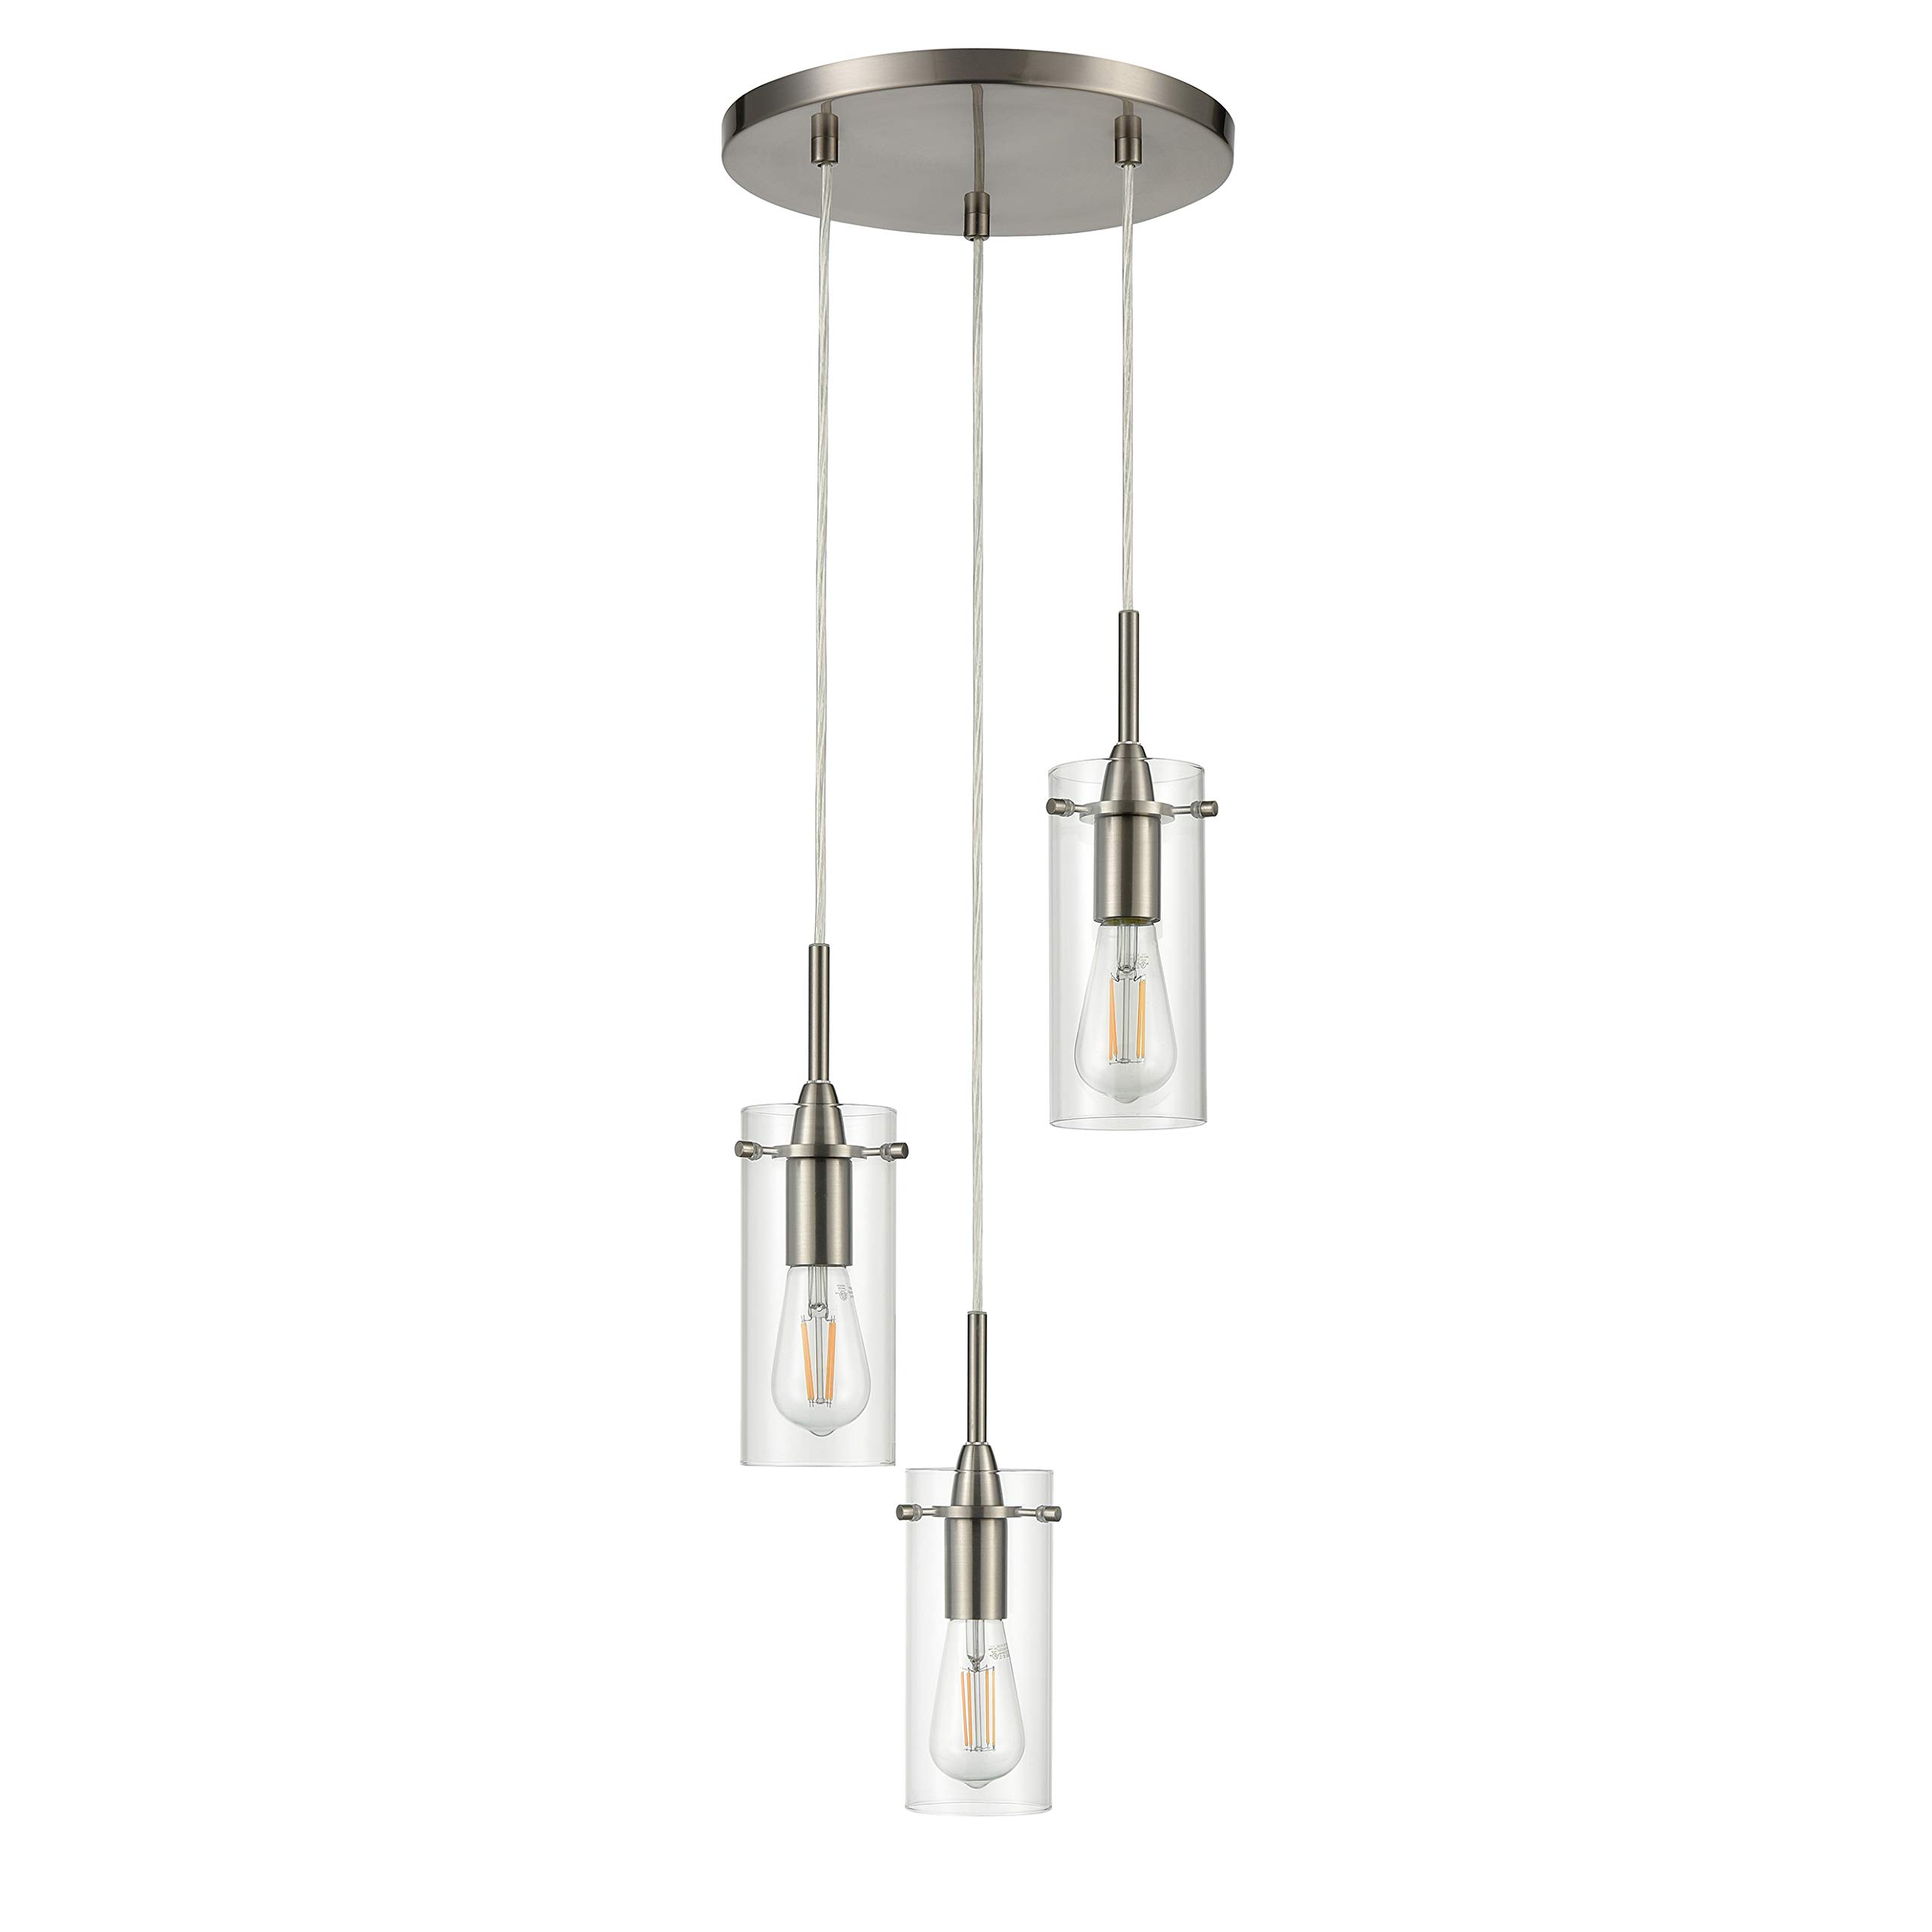 Linea di Liara Effimero 3-Light Cluster Pendant Lights Stairwell Lighting Small Chandelier Brushed Nickel Modern Chandelier Light Fixture Foyer Chandeliers Entryway High Ceiling Staircase Lights